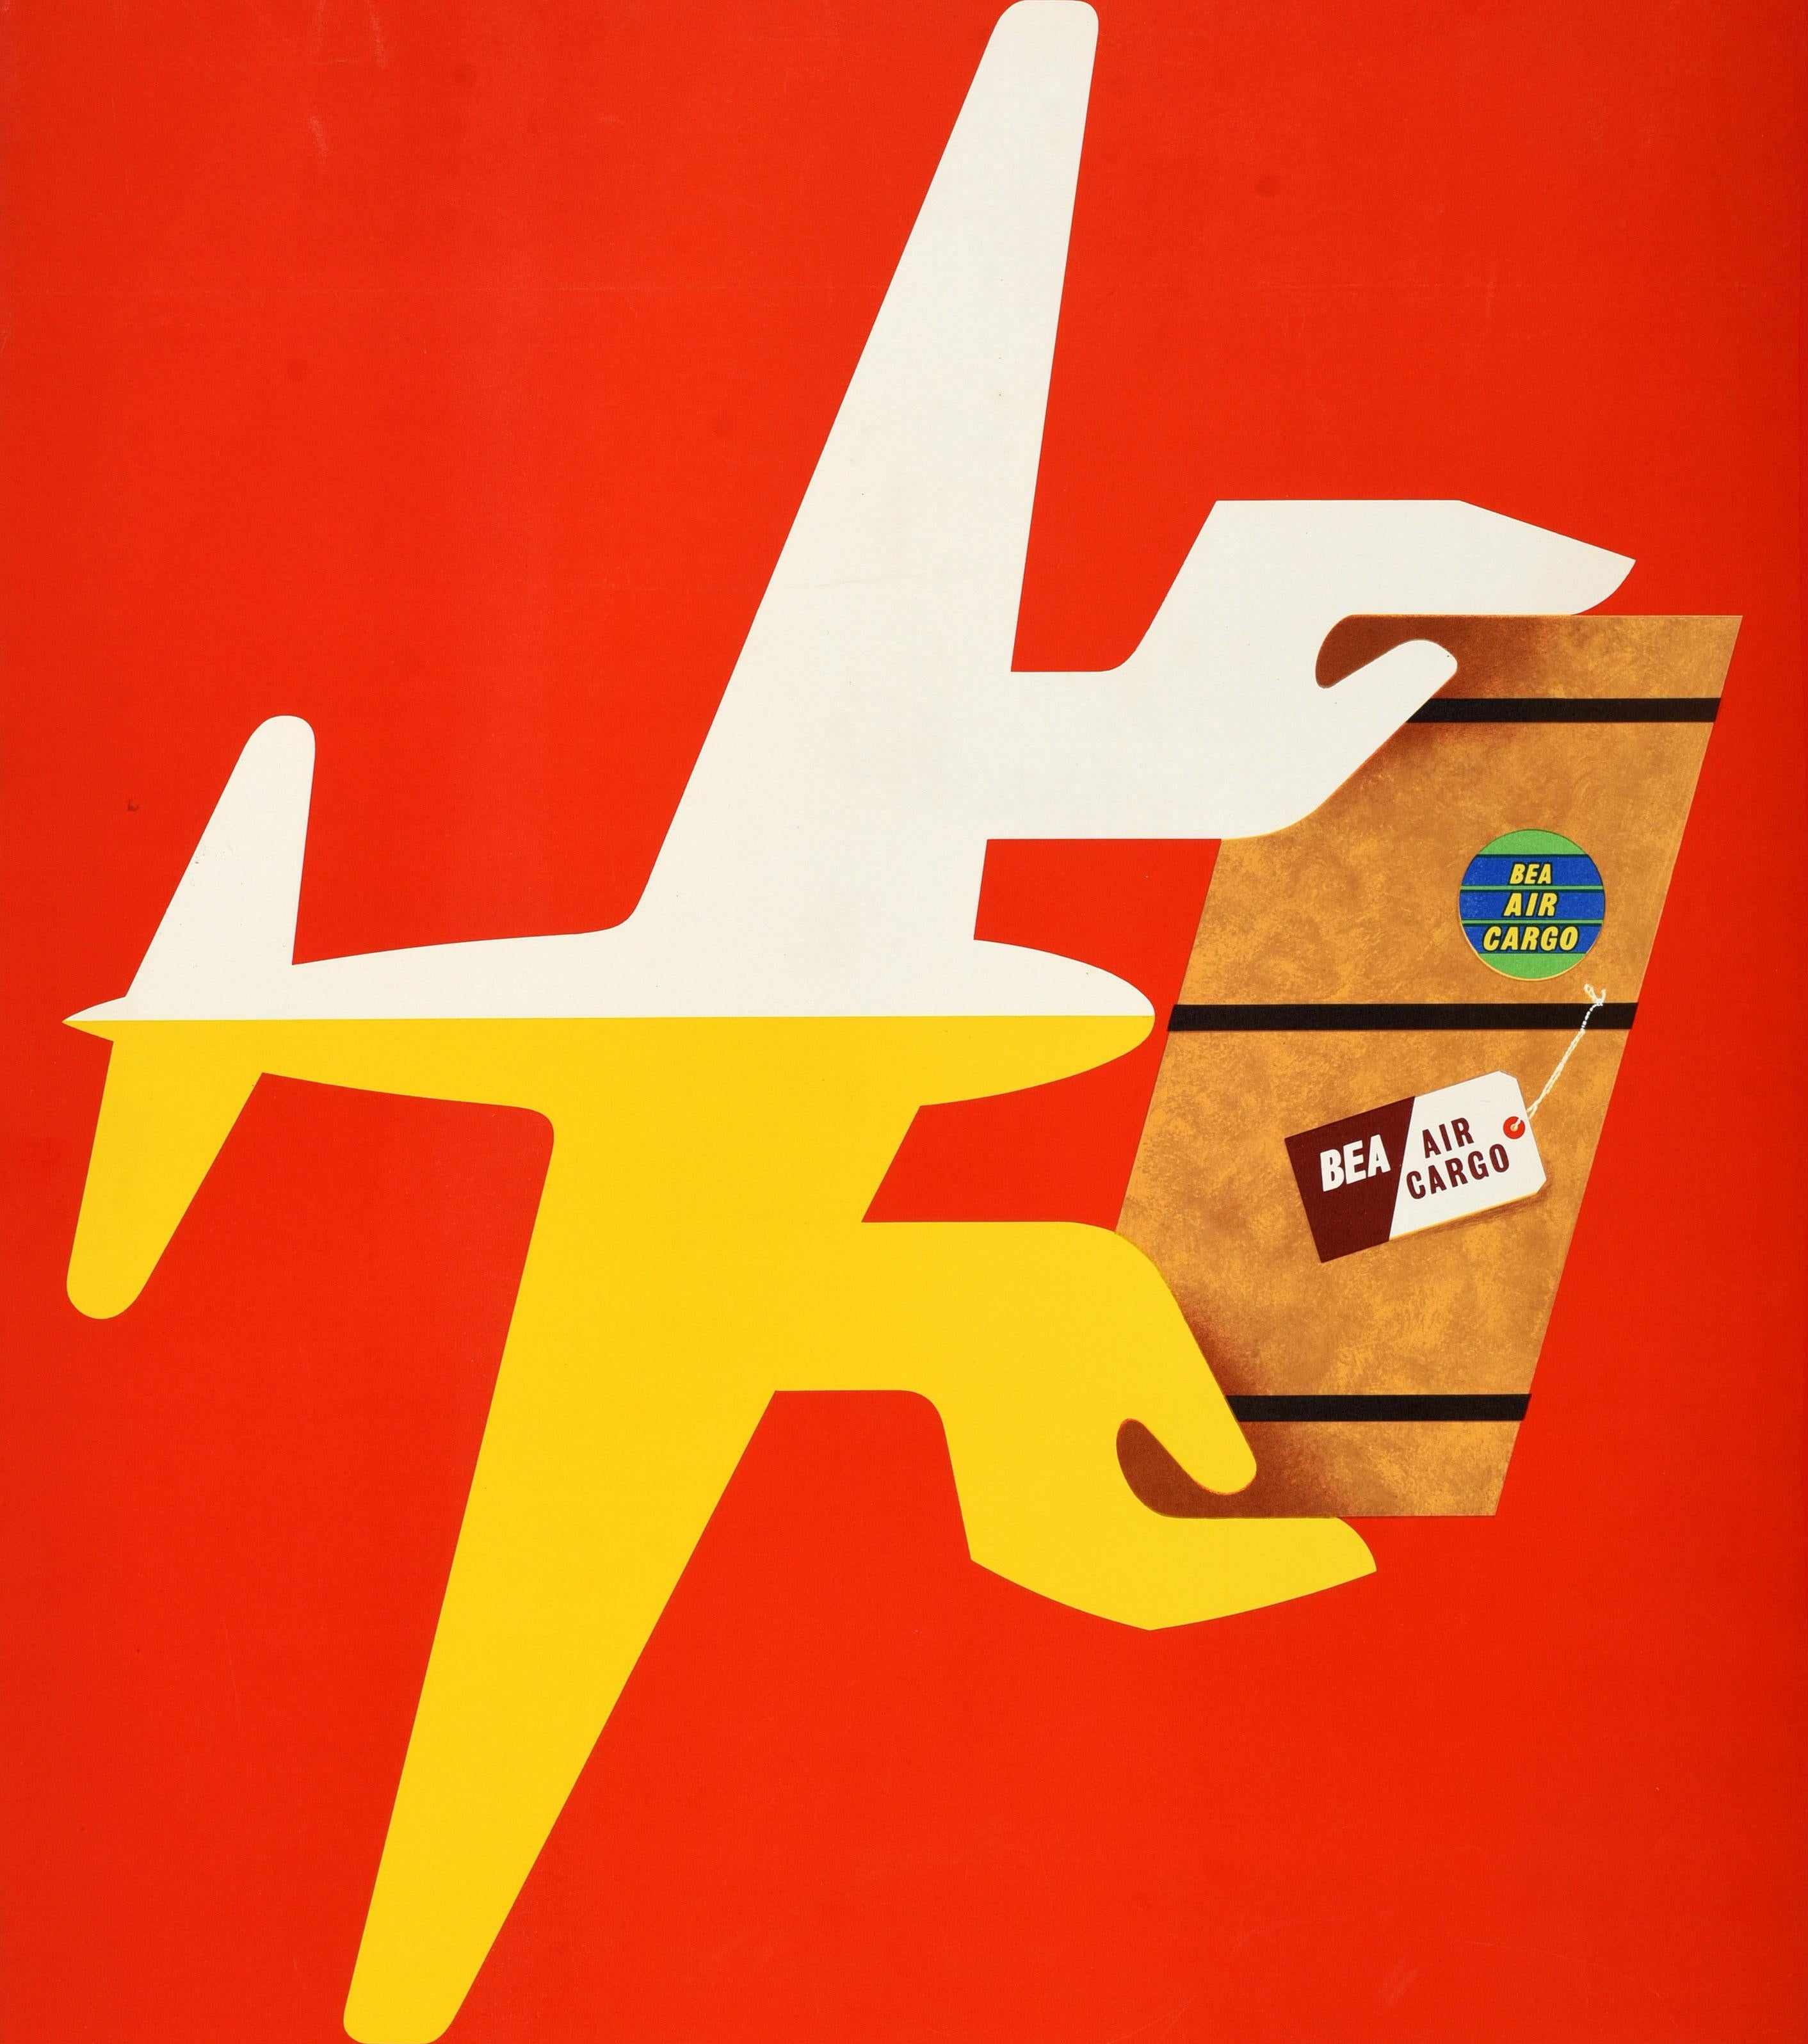 Original vintage mid-century design travel advertising poster for British European Airways - Fly Freight BEA - featuring colourful artwork by the notable British graphic designer Abram Games (Abraham Gamse; 1914-1996) depicting a stylised white and